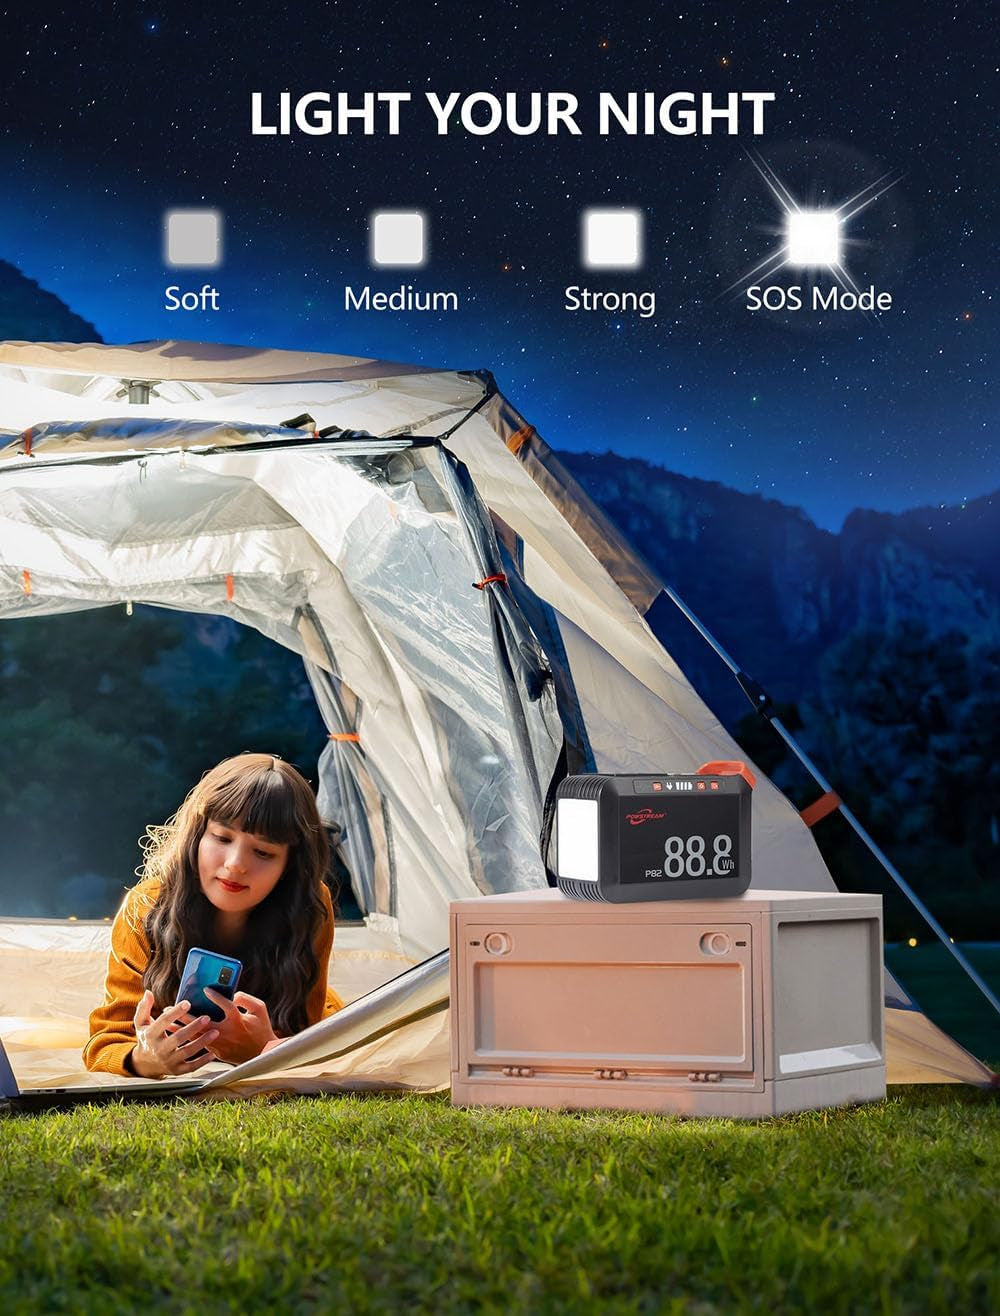 -Solar-Generator-88.8Wh-Portable-Power-Station-With-Solar-Panel-Included - Lithium Ion Battery Power Bank with AC USB Output for Outdoor Camping Adventure Home Emergency Blackout Trip